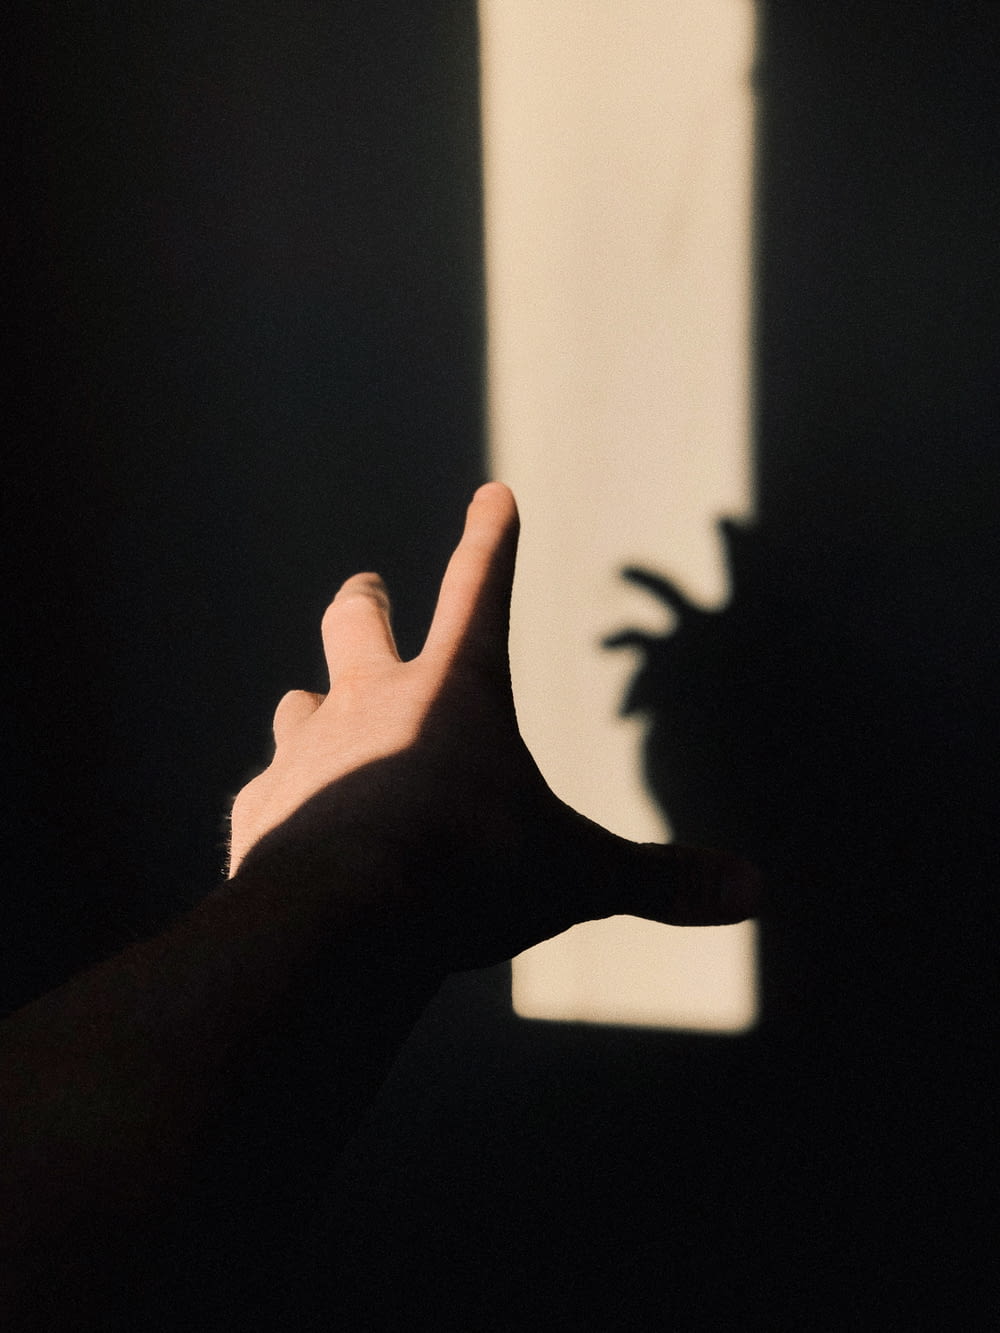 a shadow of a hand reaching towards a wall